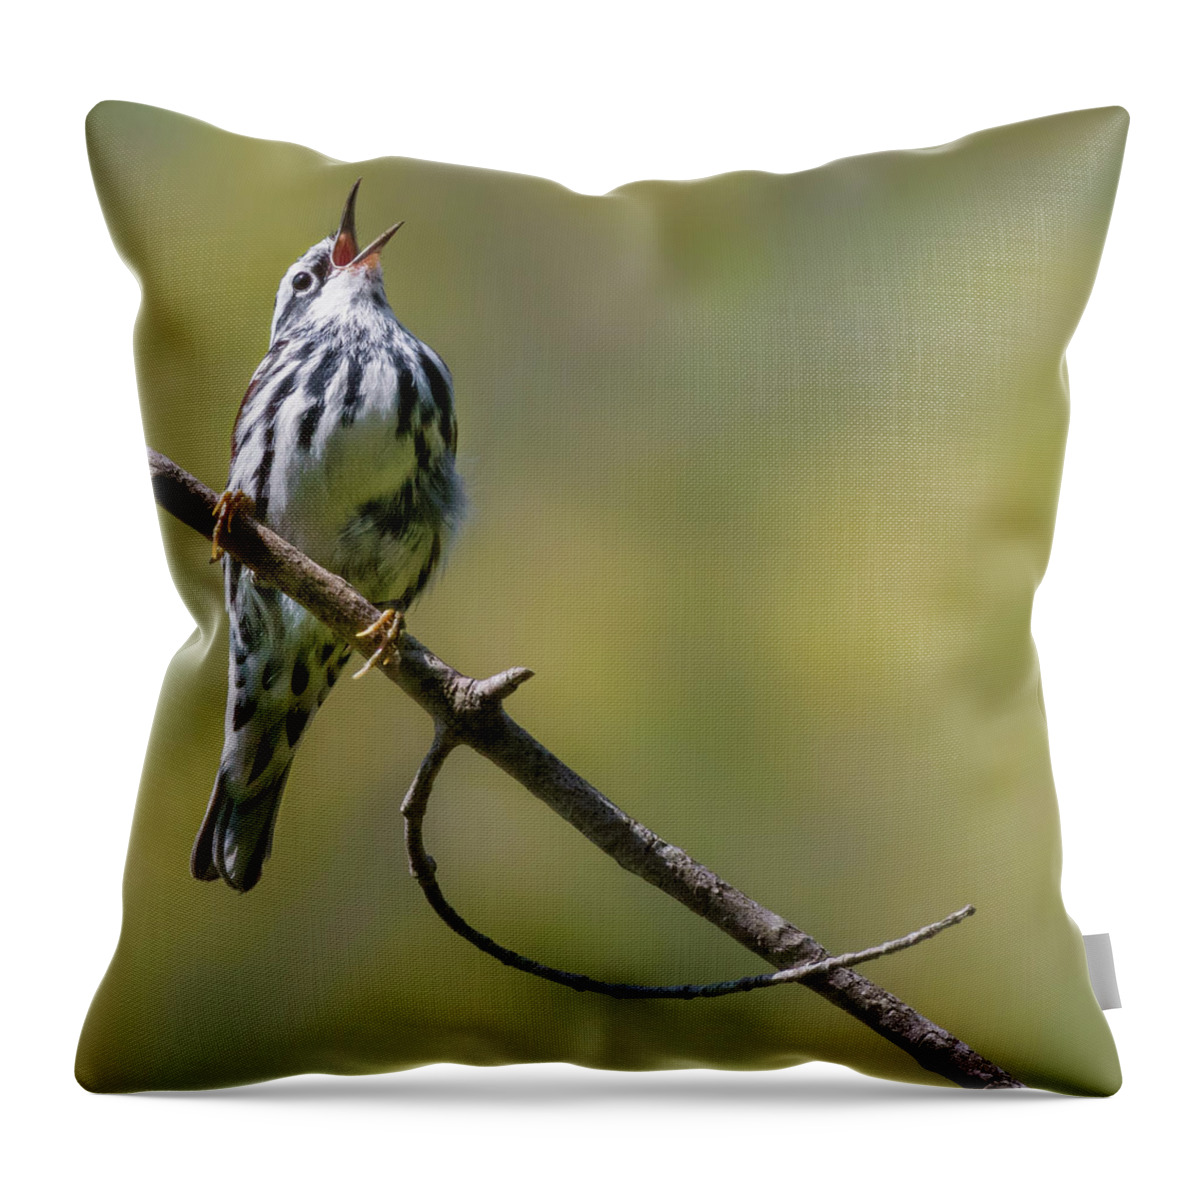 Black And White Warbler Throw Pillow featuring the photograph Black and White Warbler by Bill Wakeley